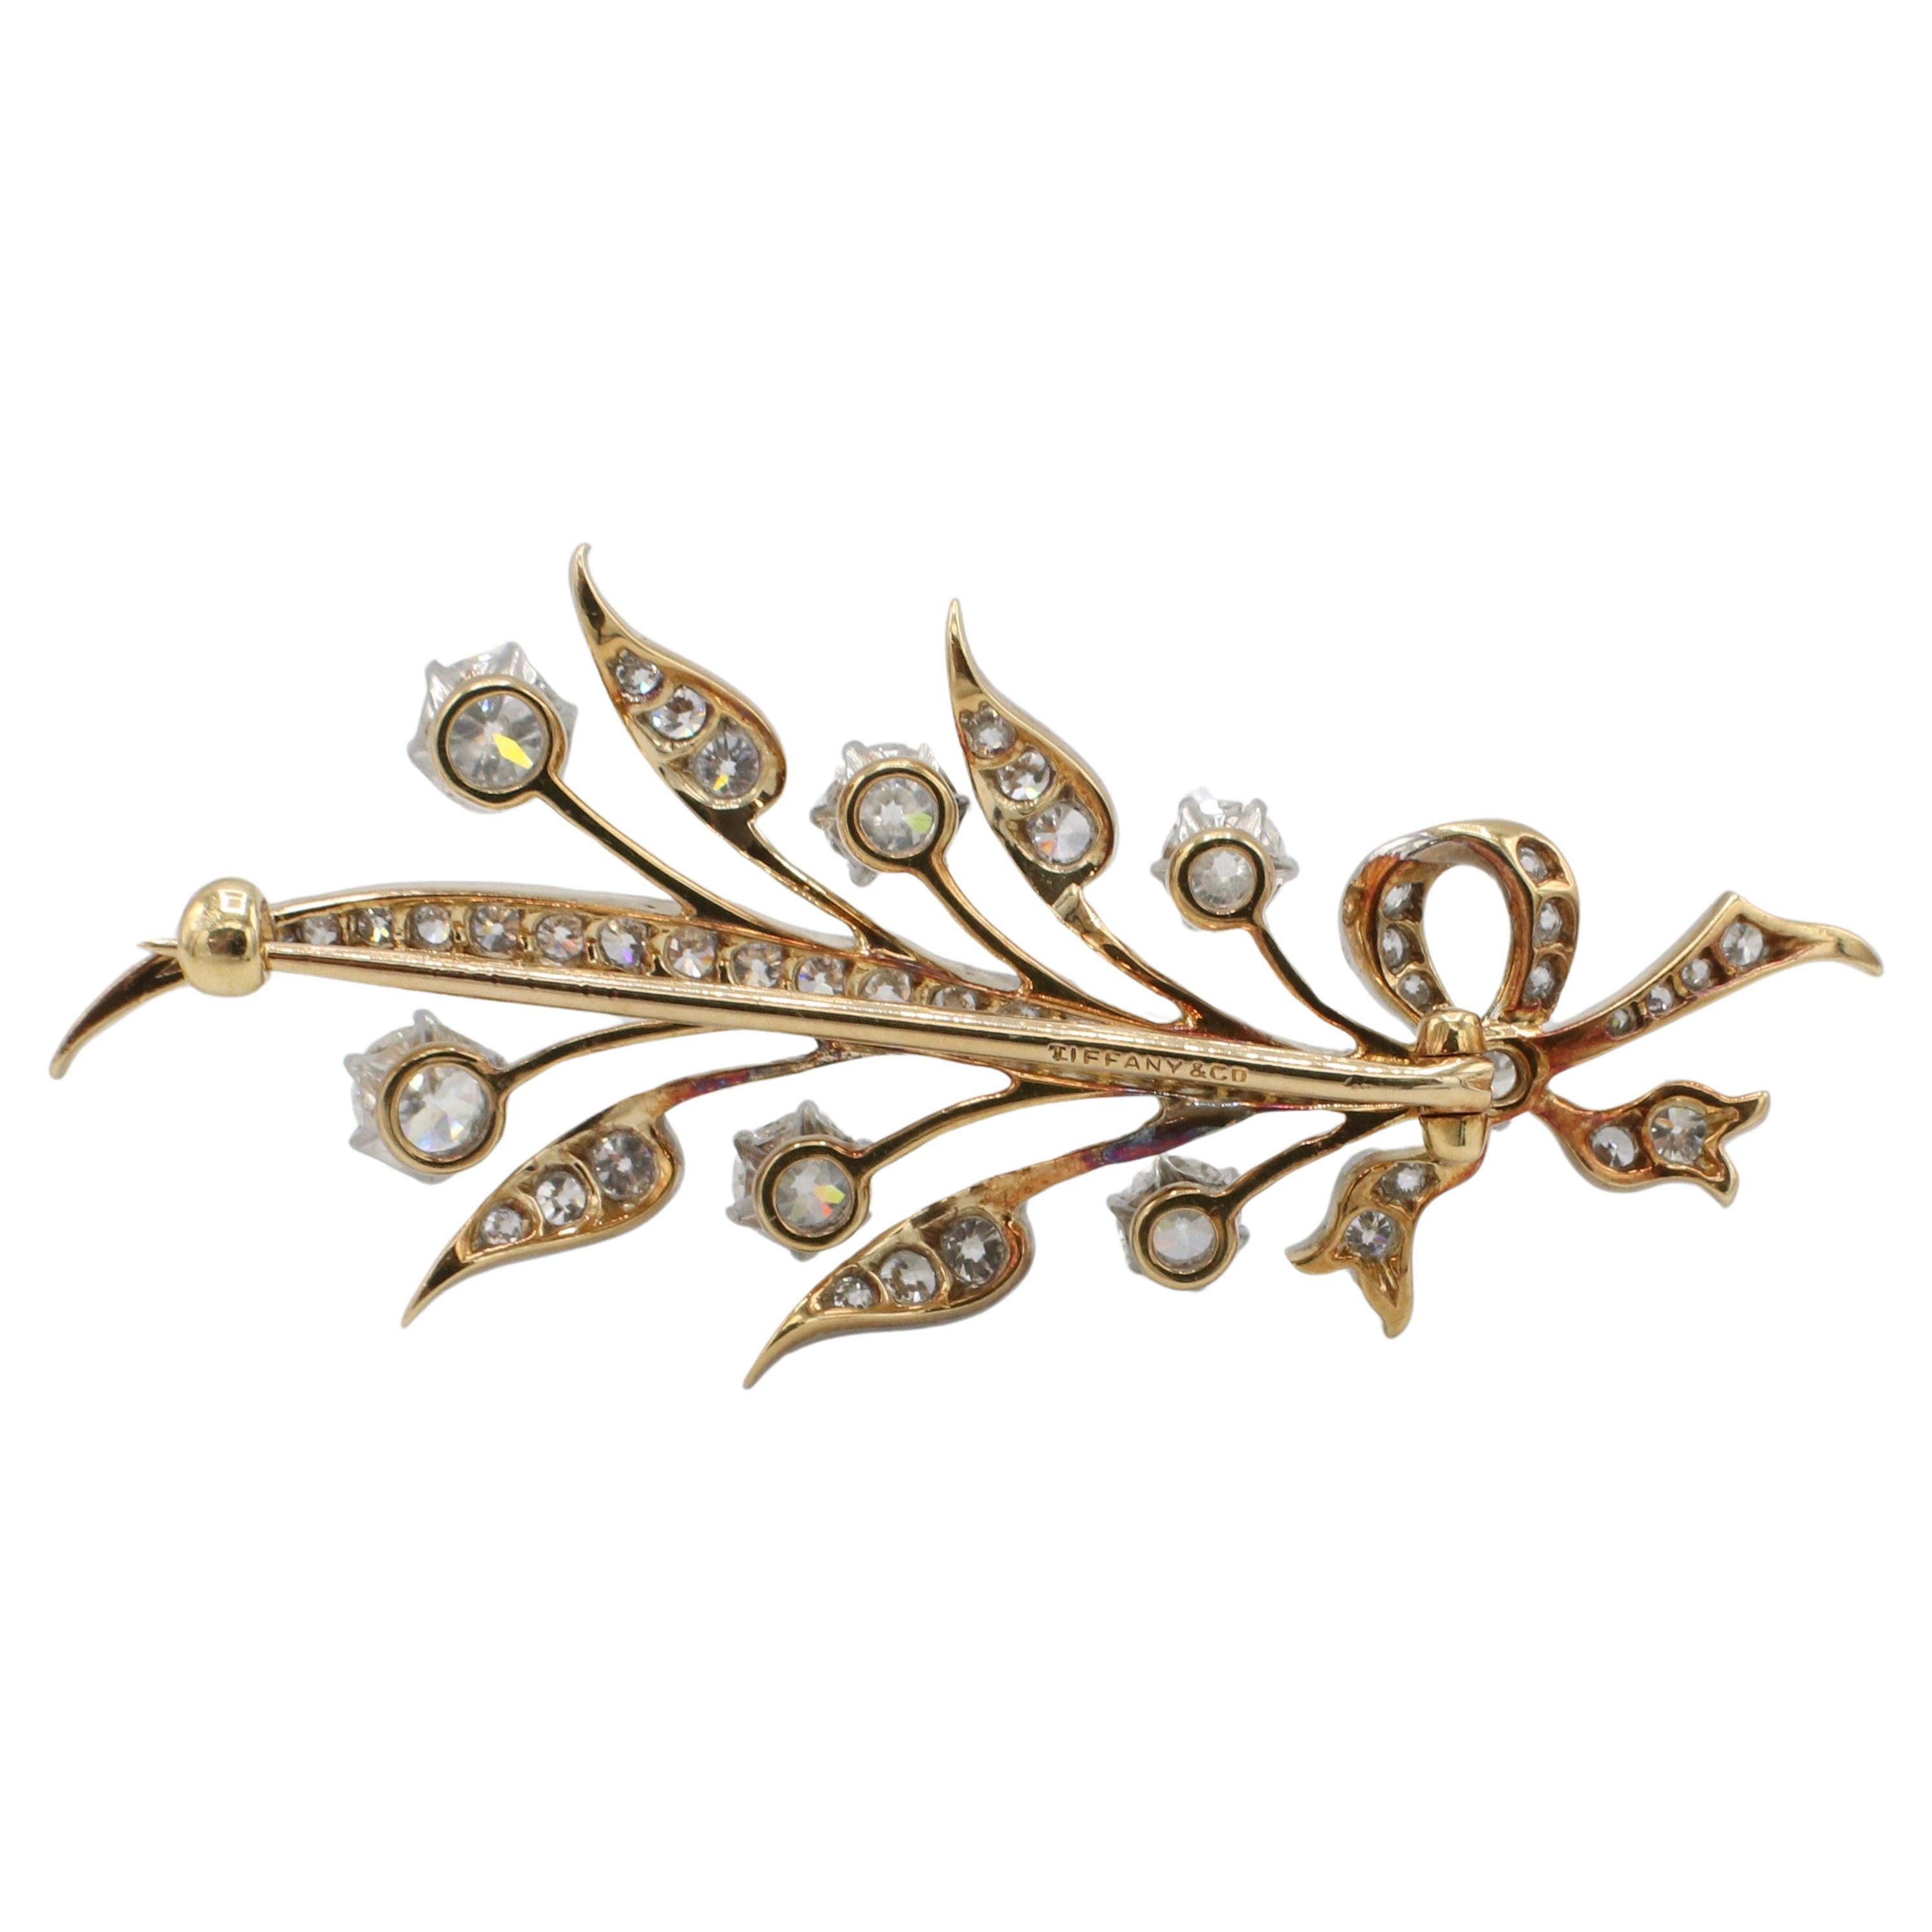 Tiffany & Co. Old European Cut Natural Diamond Leaf Brooch Pin Platinum & Gold
Metal: Platinum & 18k yellow gold
Weight: 9 grams
Dimensions: 53 x 25mm
Signed: Tiffany & Co.
Diamonds: Approx. 2.20 CTW F-G VS Old European cut natural diamonds
